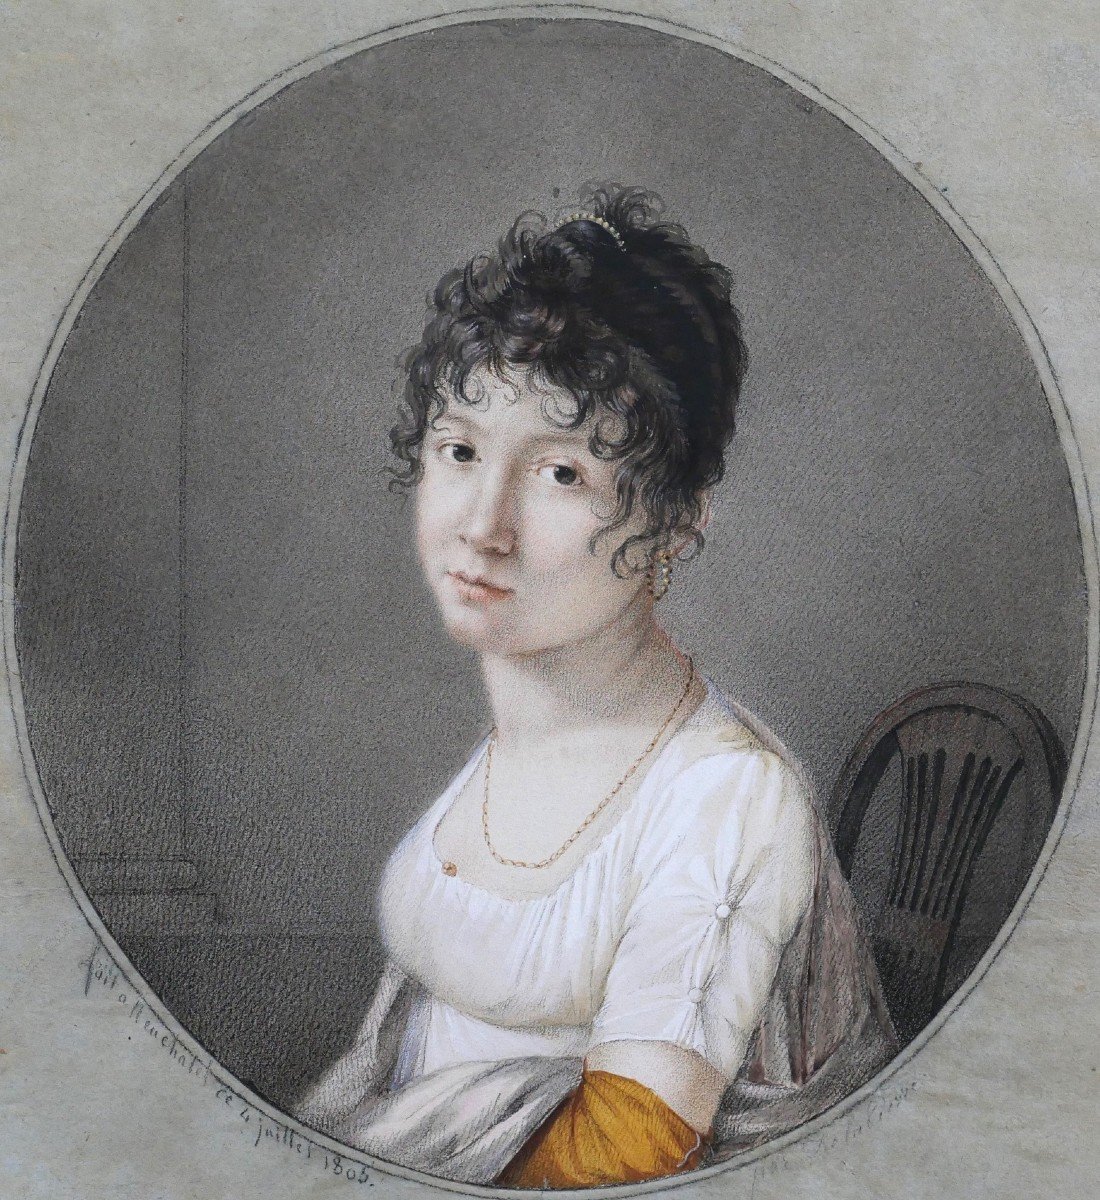 Gaspart-isaac Delapierre 1780-1811 Portrait Of A Woman, Drawing, 1805